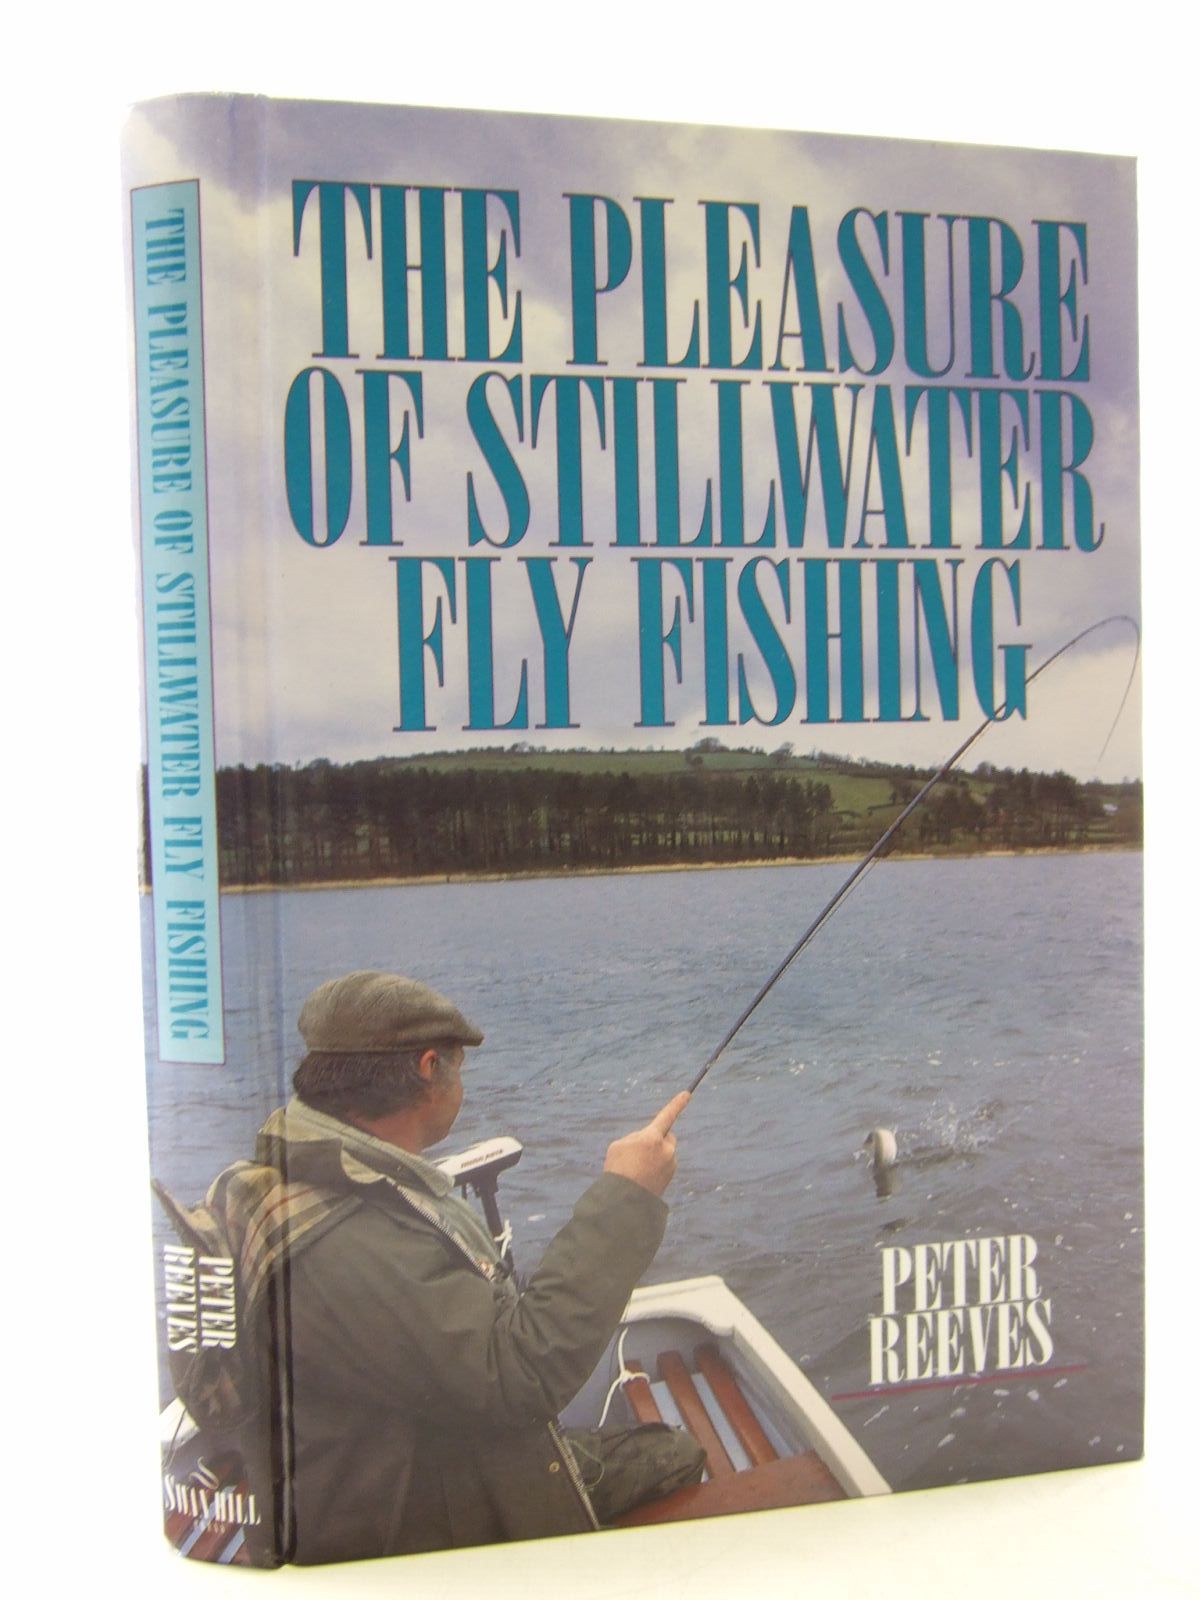 Photo of THE PLEASURE OF STILLWATER FLY FISHING written by Reeves, Peter published by Swan Hill Press (STOCK CODE: 1707283)  for sale by Stella & Rose's Books